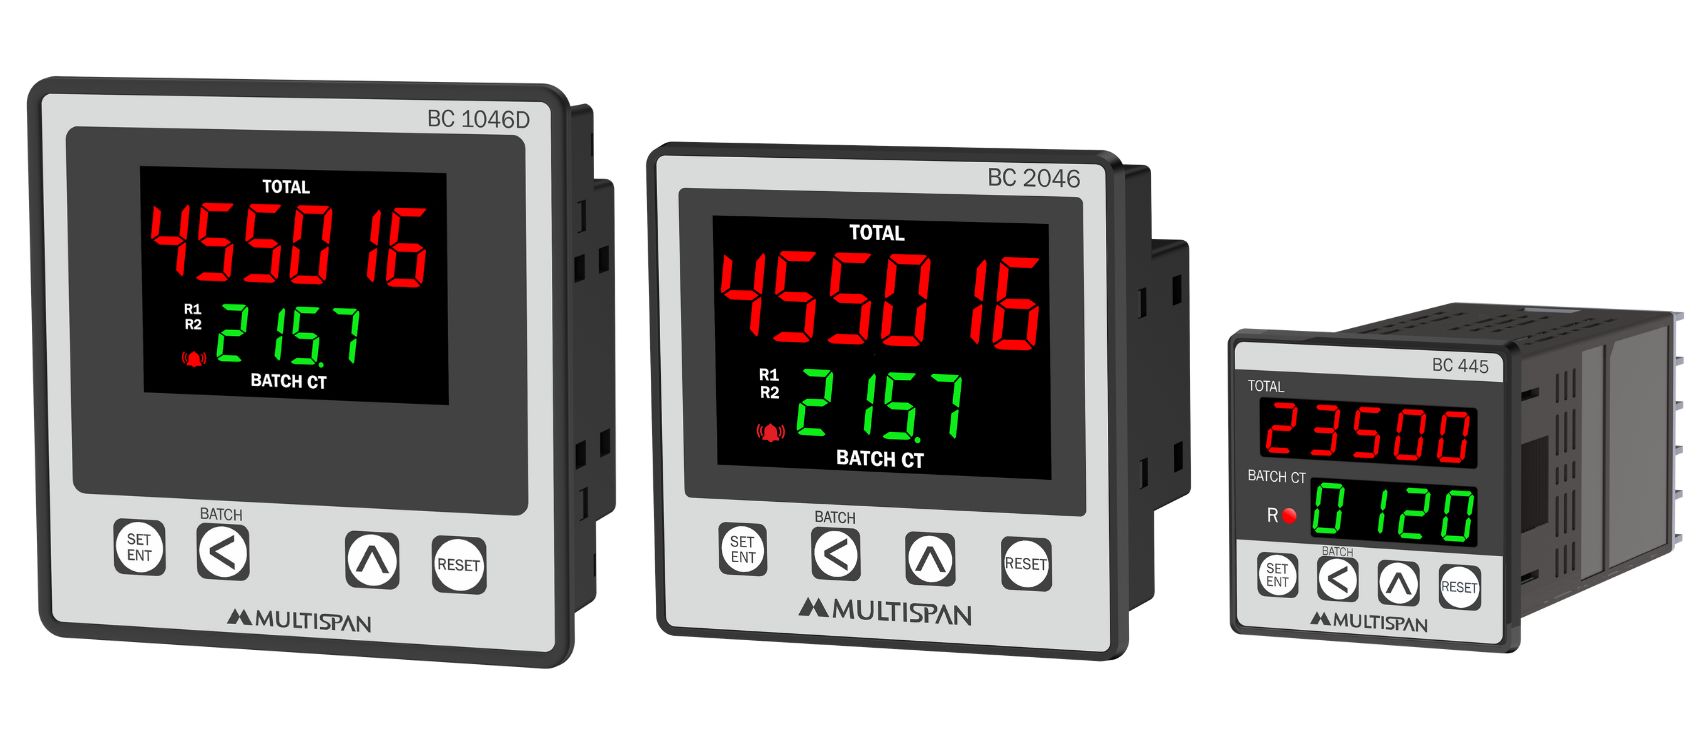 BC-1046D- Batch Counter - product image